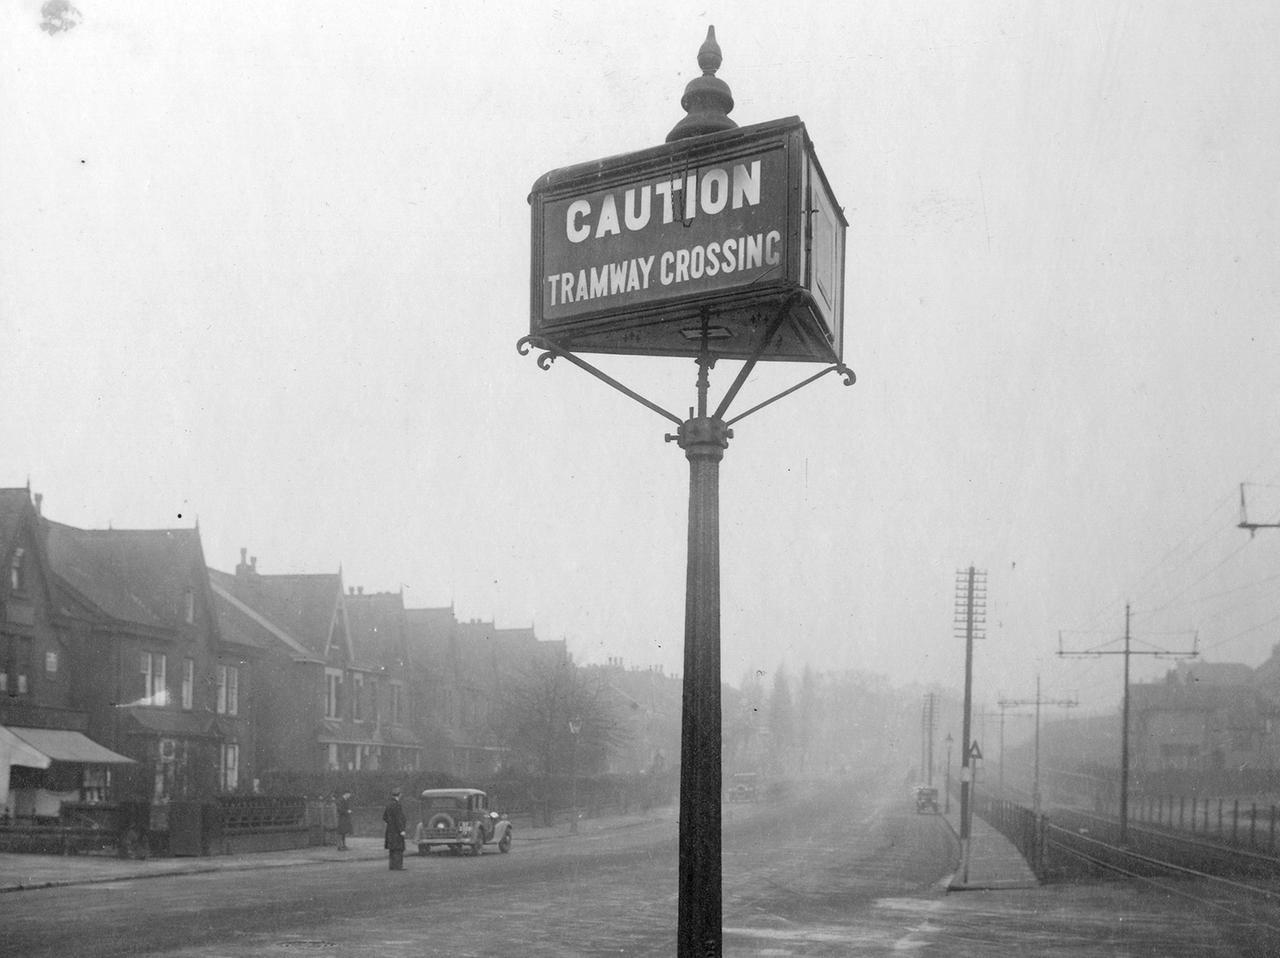 A view looking north-east along Roundhay Road focusing on a tramway caution lamp. This is at the junction with Copgrove Road where the road crosses the tramway reservation track running parallel to the main road.